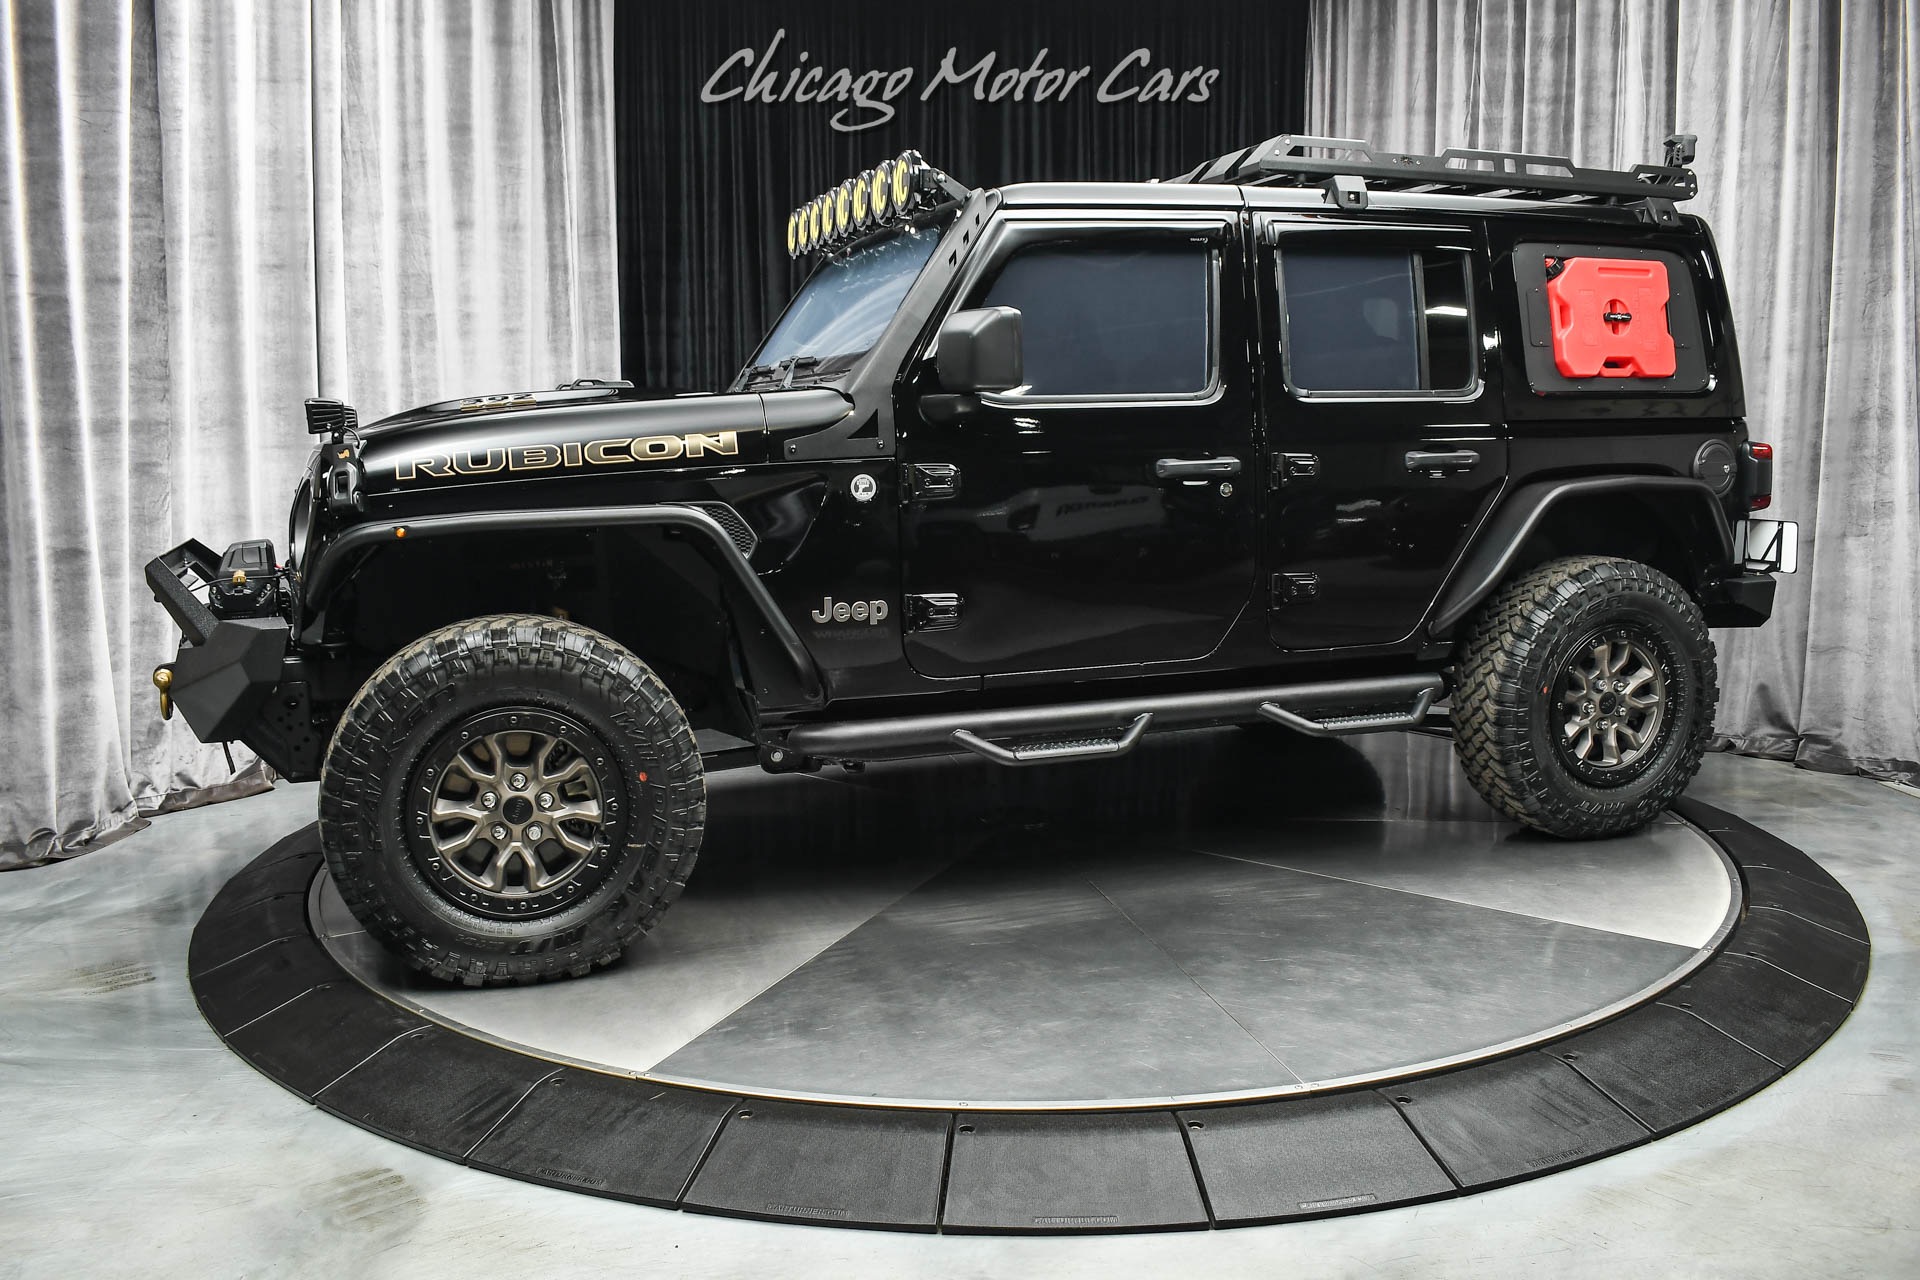 Used 2021 Jeep Wrangler Unlimited Rubicon 392 4x4 BULLET RESISTANT! Loaded  with Upgrades! Armored! For Sale ($189,800) | Chicago Motor Cars Stock  #MW732929-MK